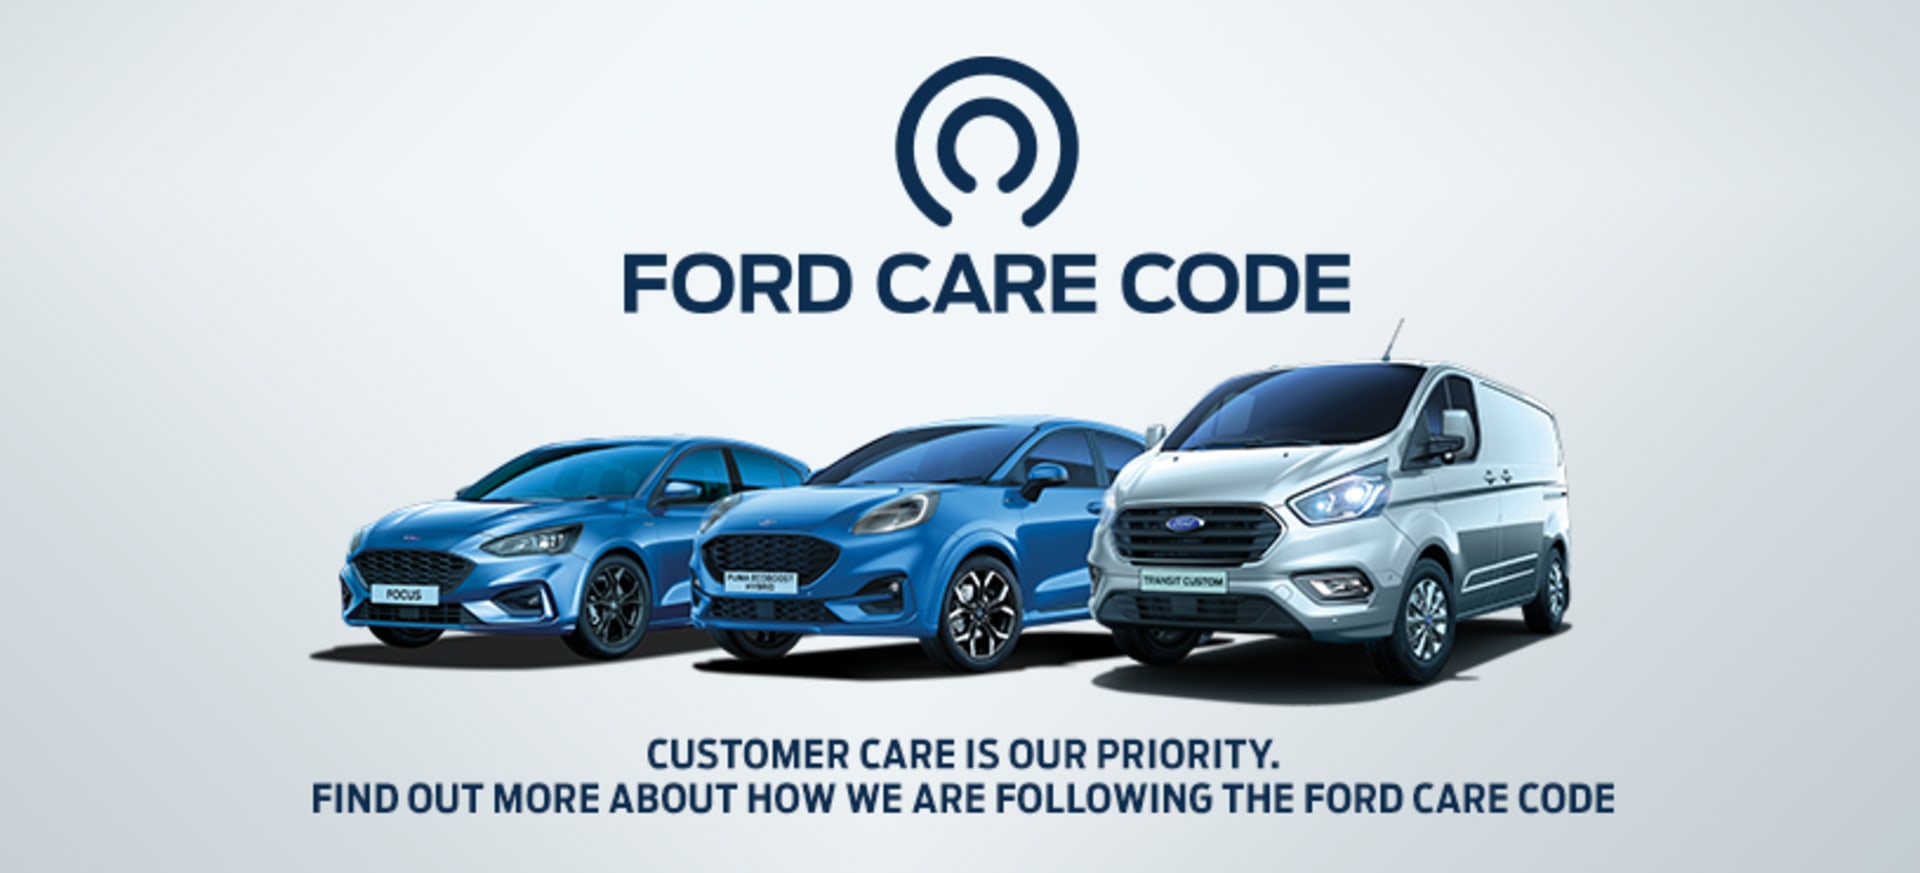 Ford Care Code